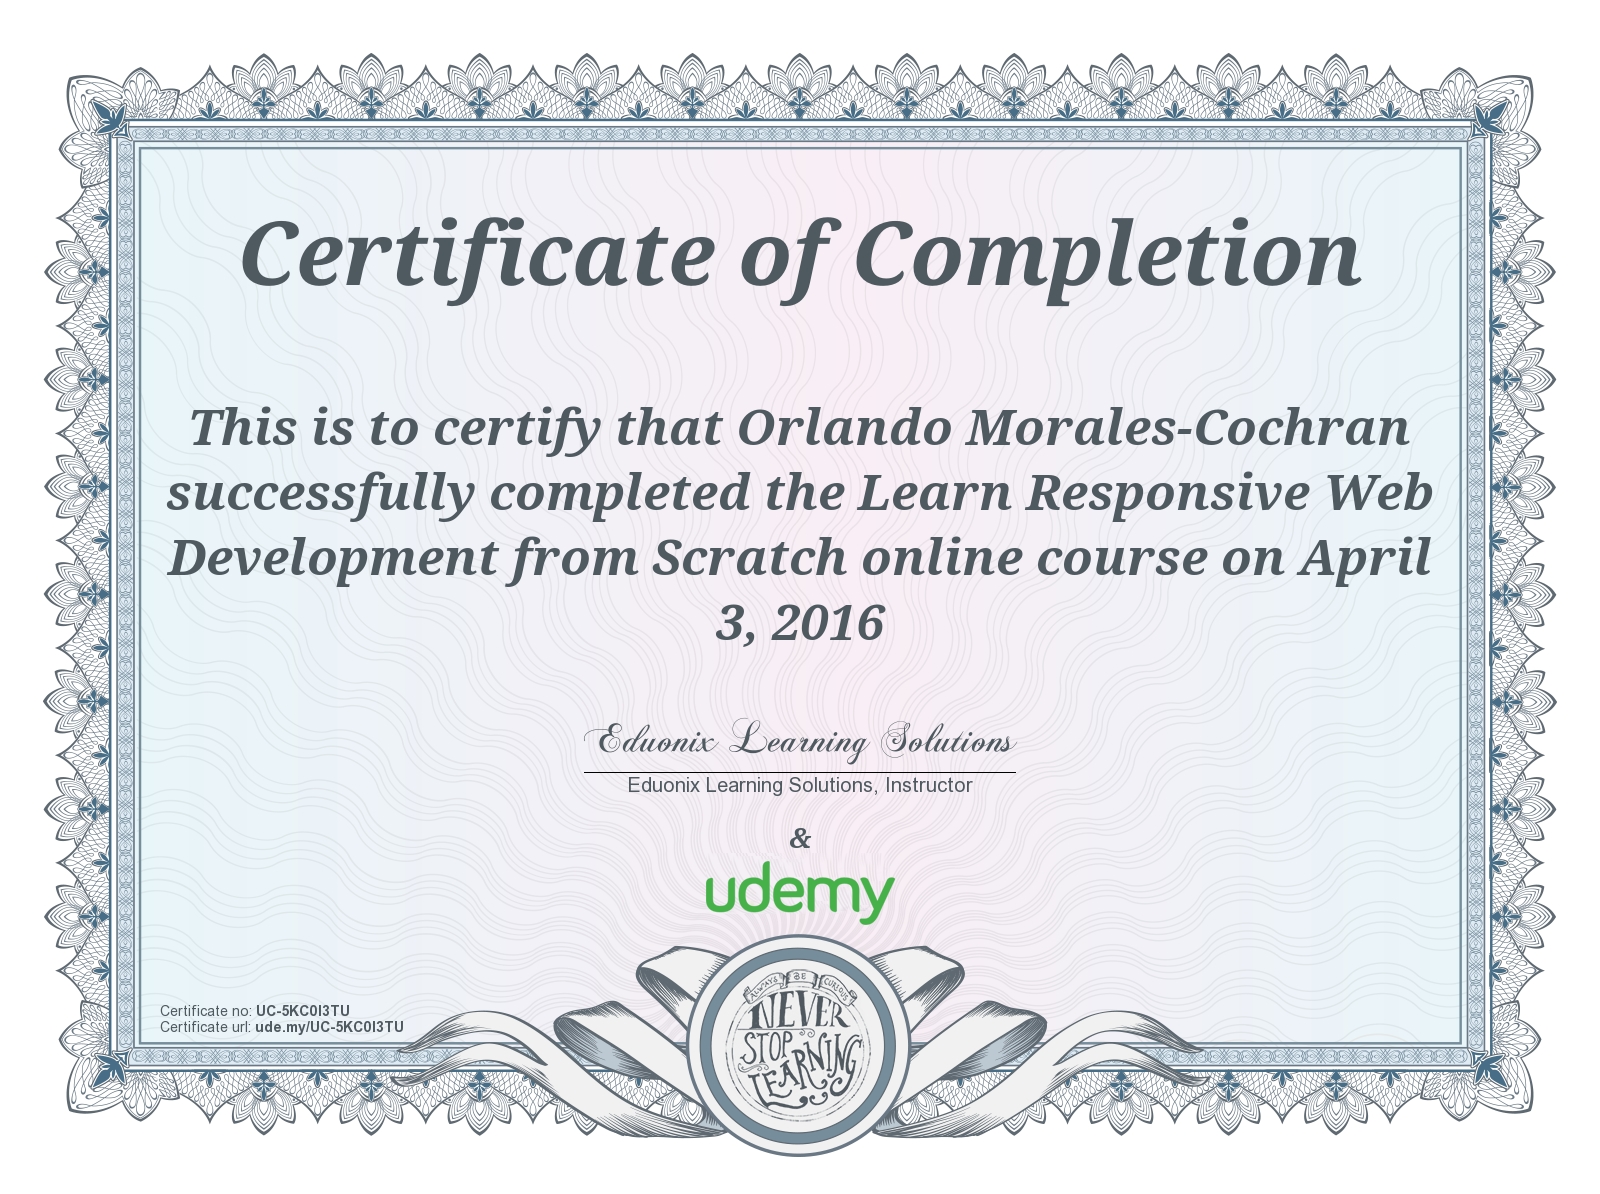 Udemy - Responsive Design with Bootstrap Certificate of Course Completion